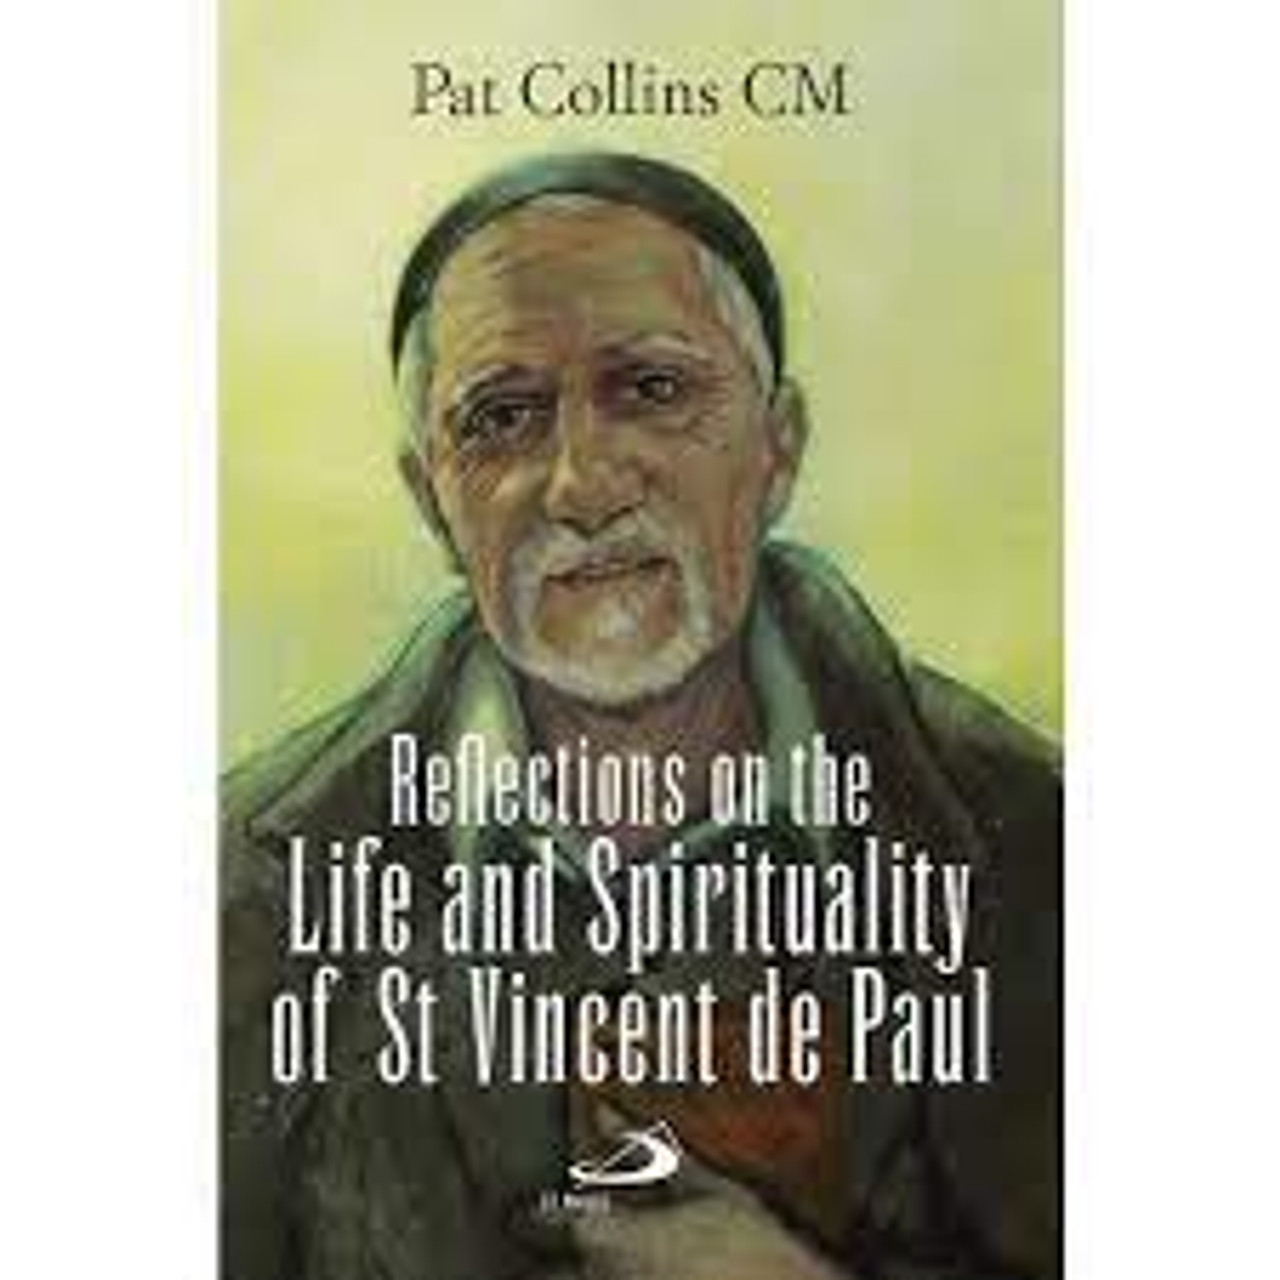 Pat Collins / Reflections on the Life and Spirituality of St Vincent de Paul (Large Paperback)